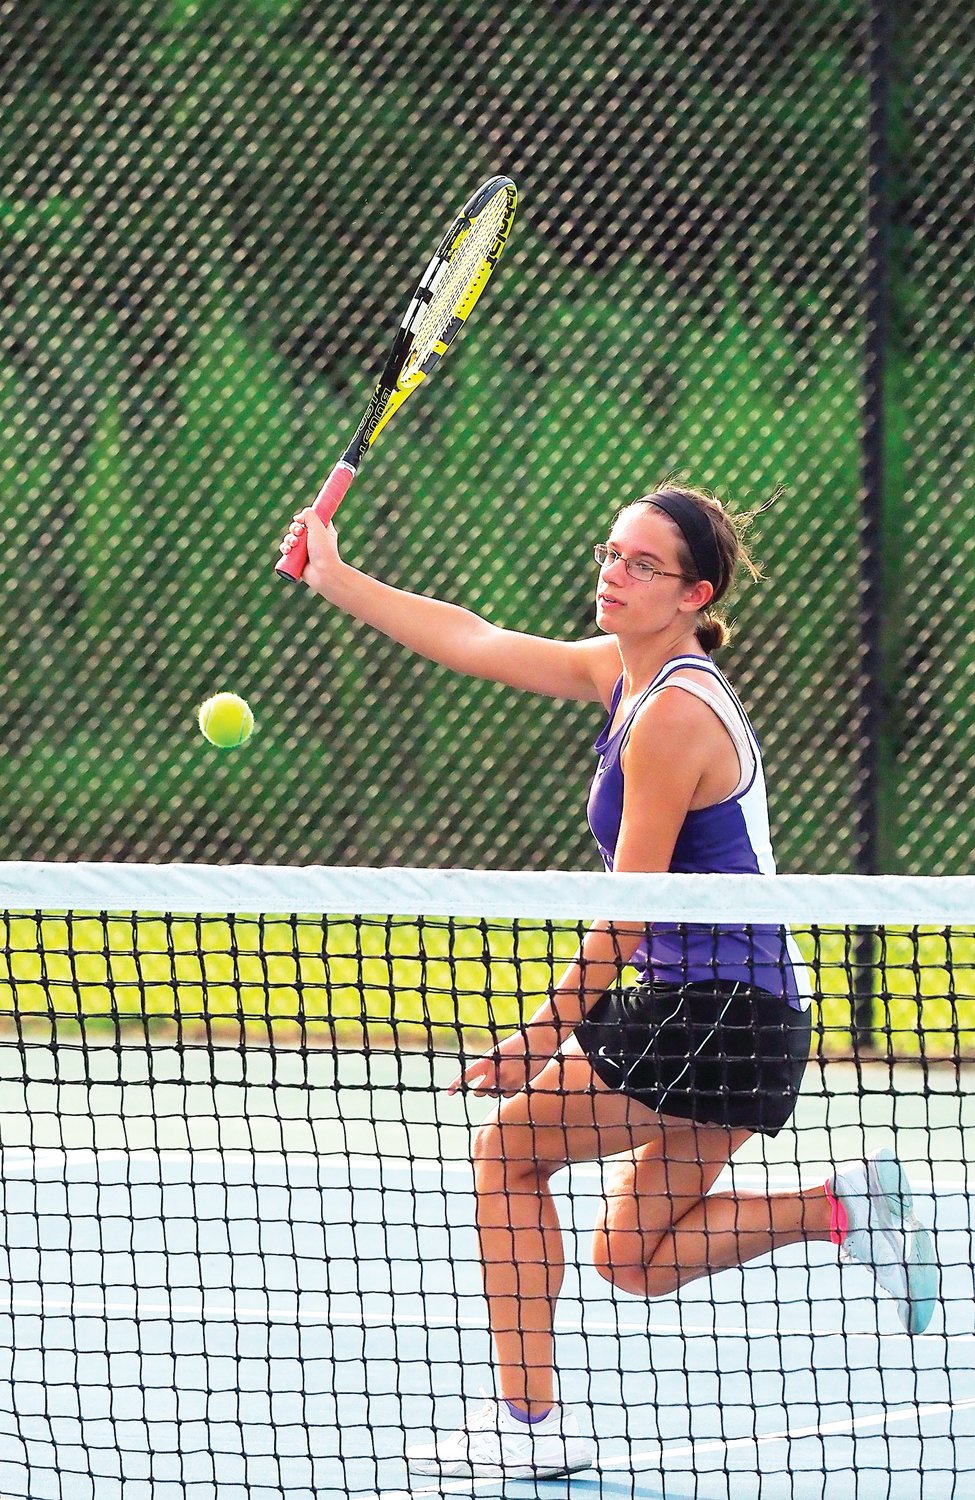 Chatham Charter senior Emily Stecher makes a play at the net during her singles win over Research Triangle junior Julia Shough, 8-2, on Aug. 31. Stecher, the Knights' No. 6 player, was the only member of the team to win both her singles and doubles matches.